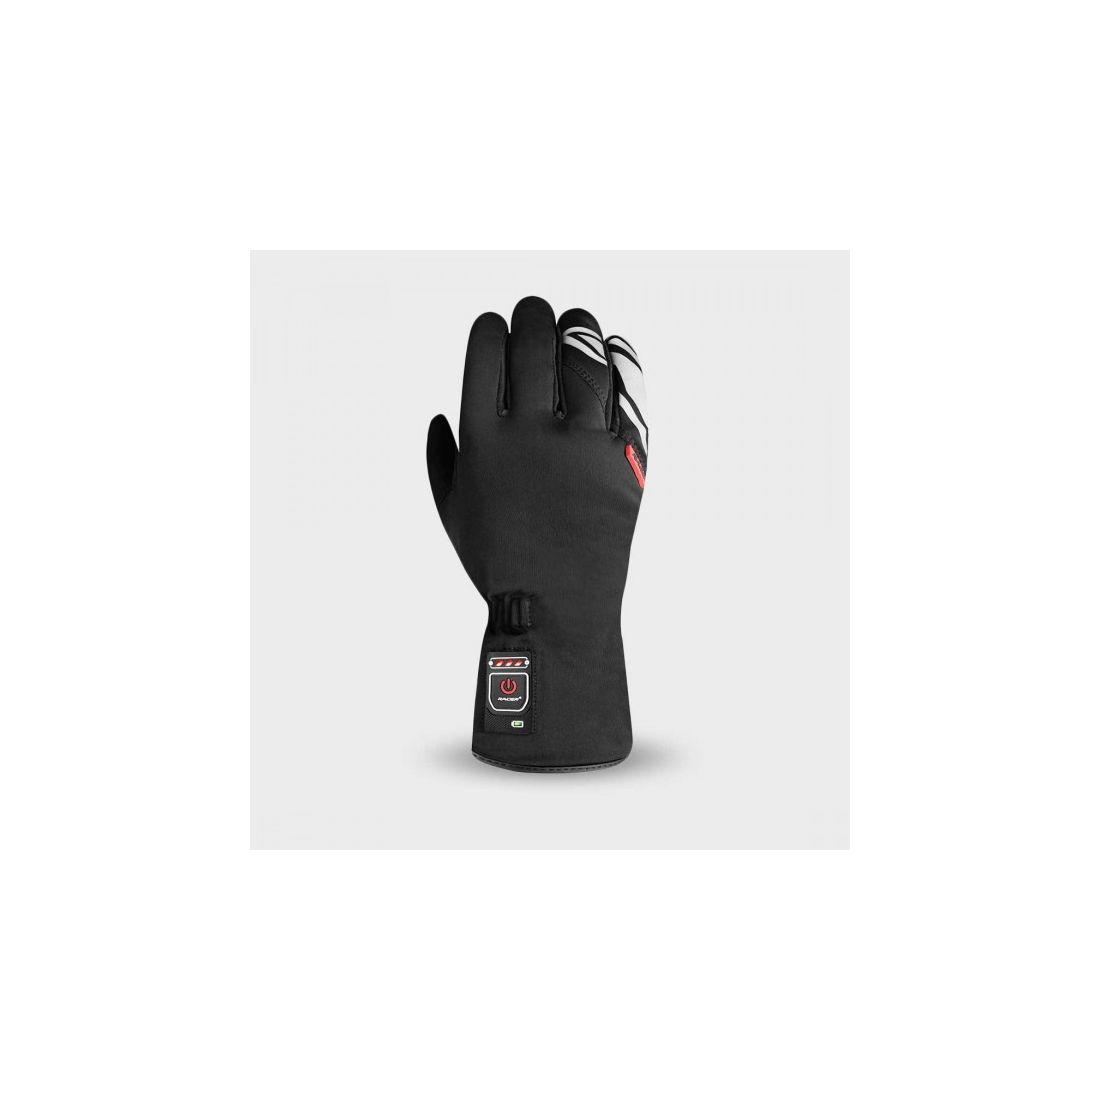 EGLOVE 2 - HEATED BICYCLE GLOVES